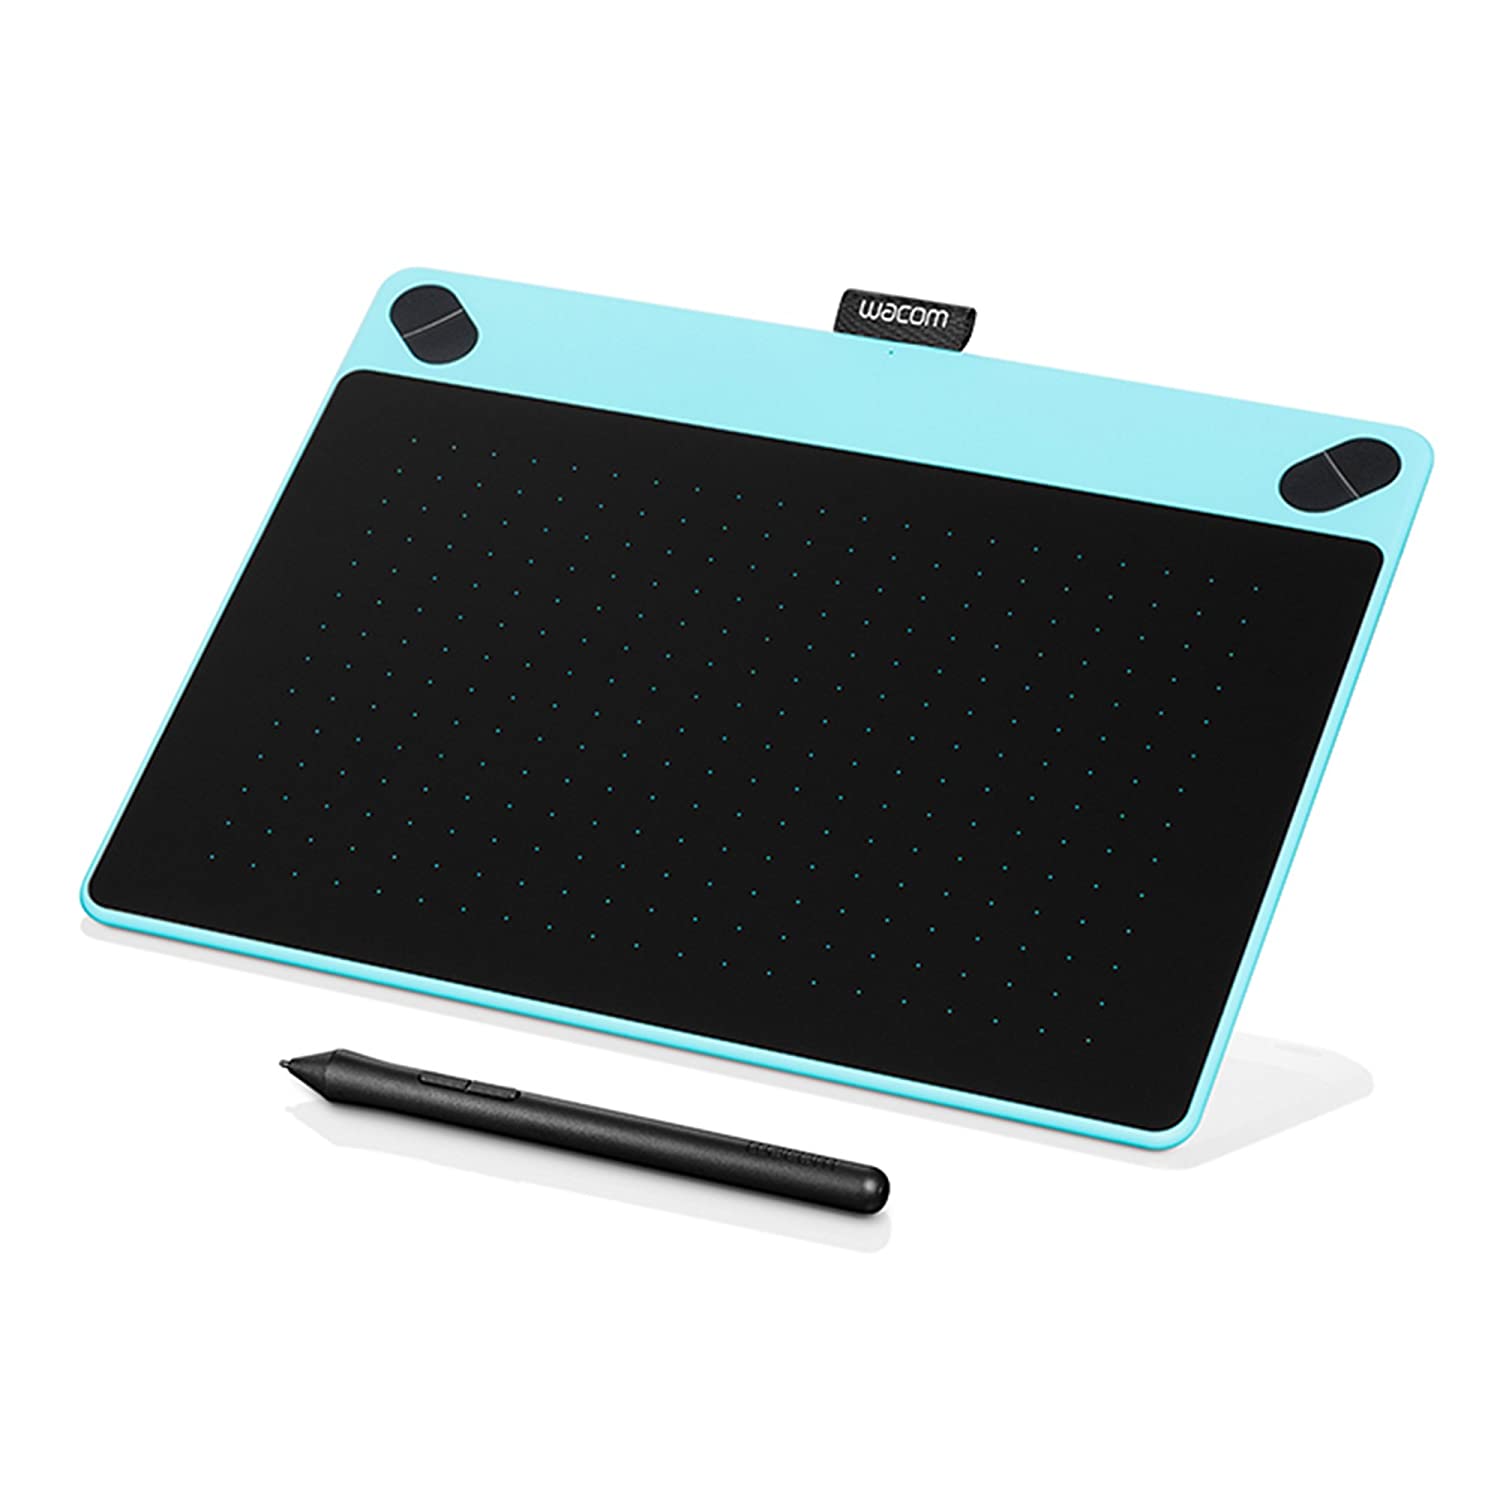 intuos 3 graphics tablet driver